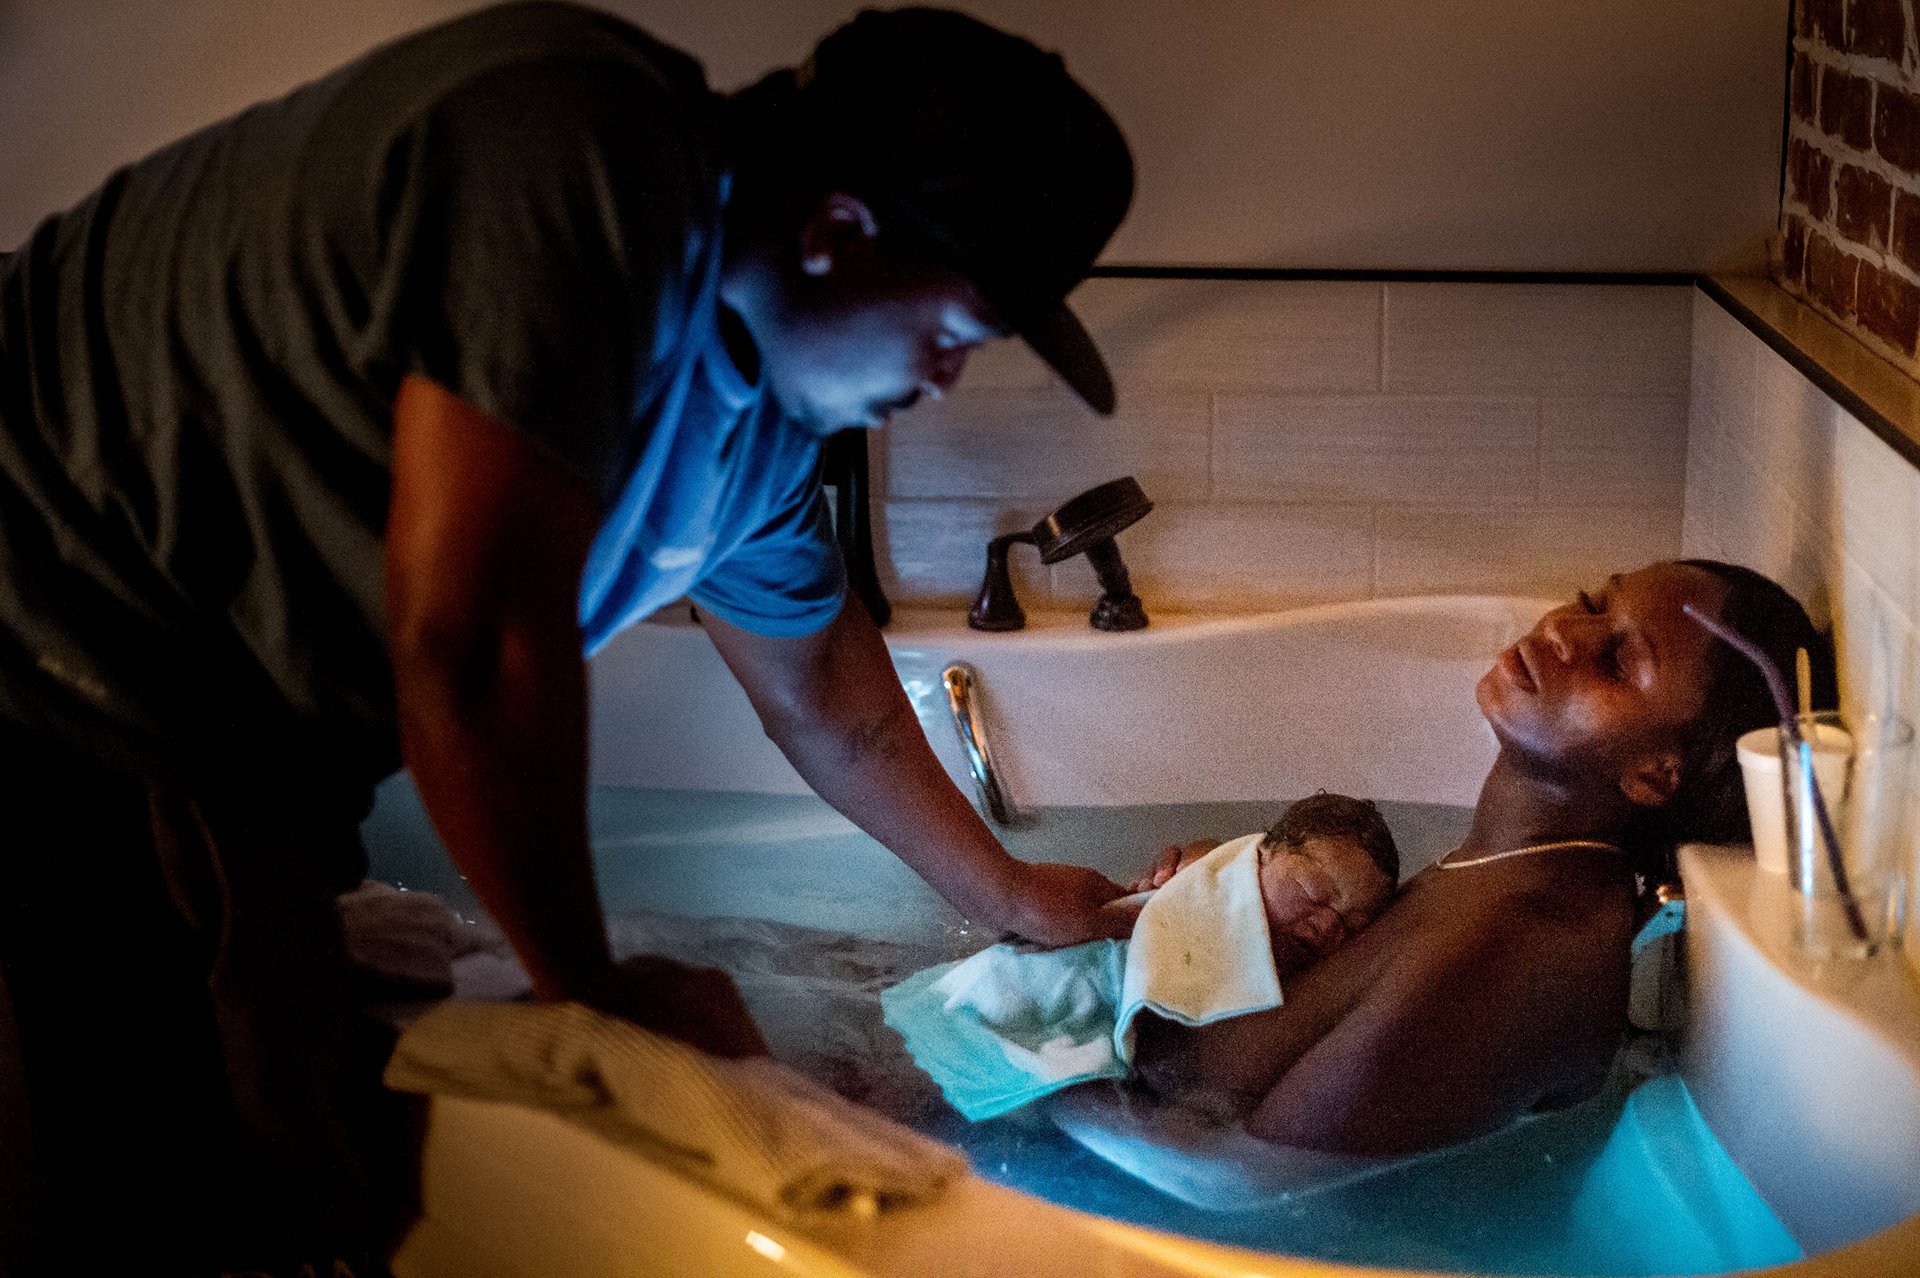 While Aysha rests, her partner Dennis Richmond touches their son after catching their baby in the birthing bath at the Kindred Space LA birthing center, in South Los Angeles, USA, on Mothers&rsquo; Day.